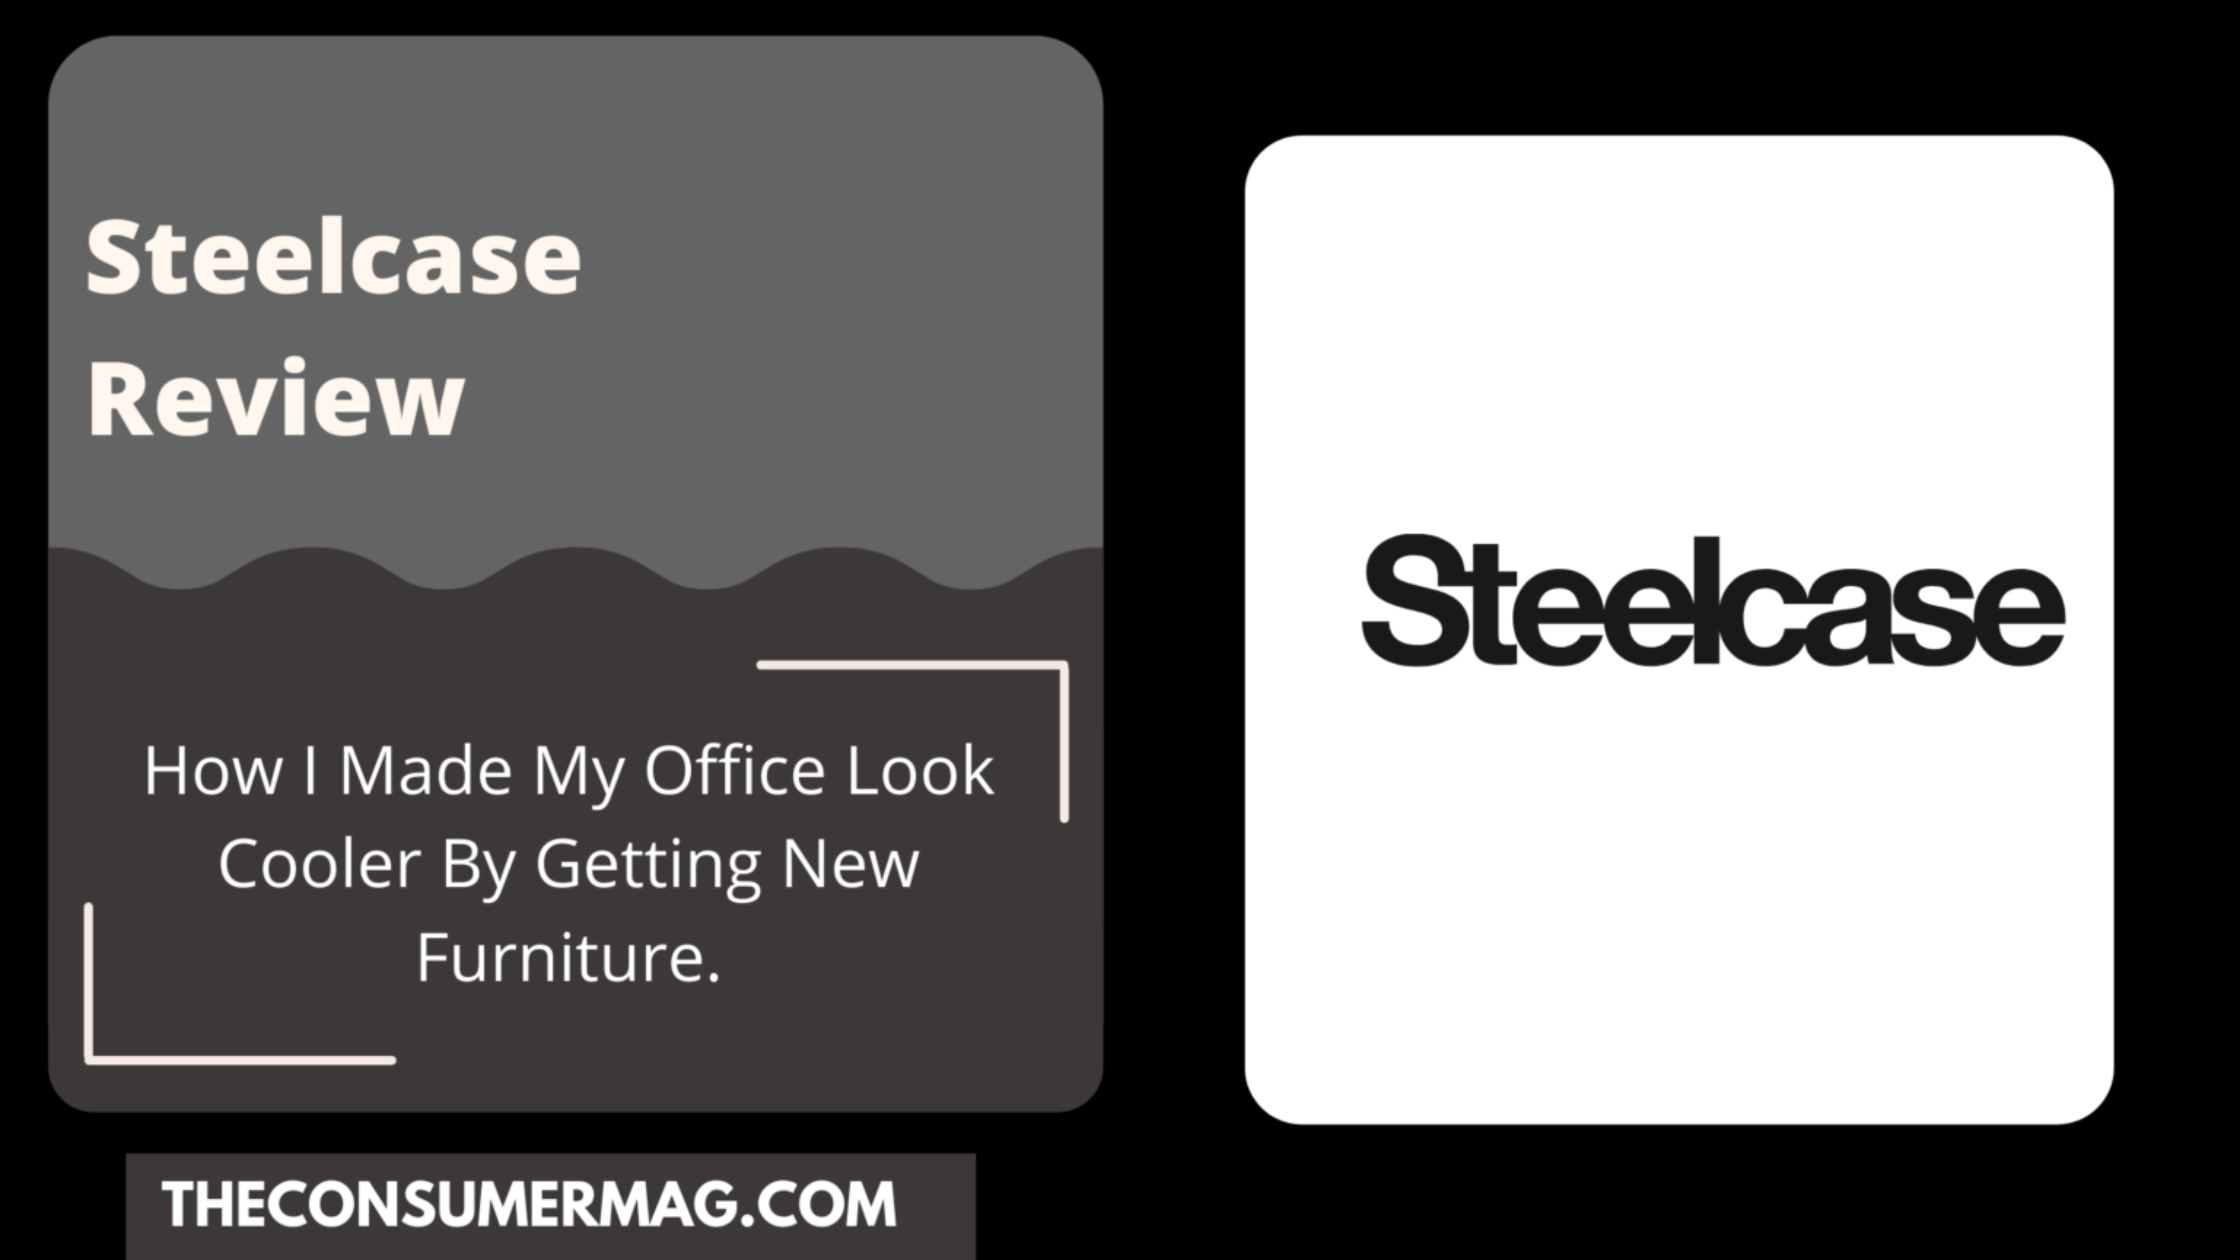 Steelcase featured image